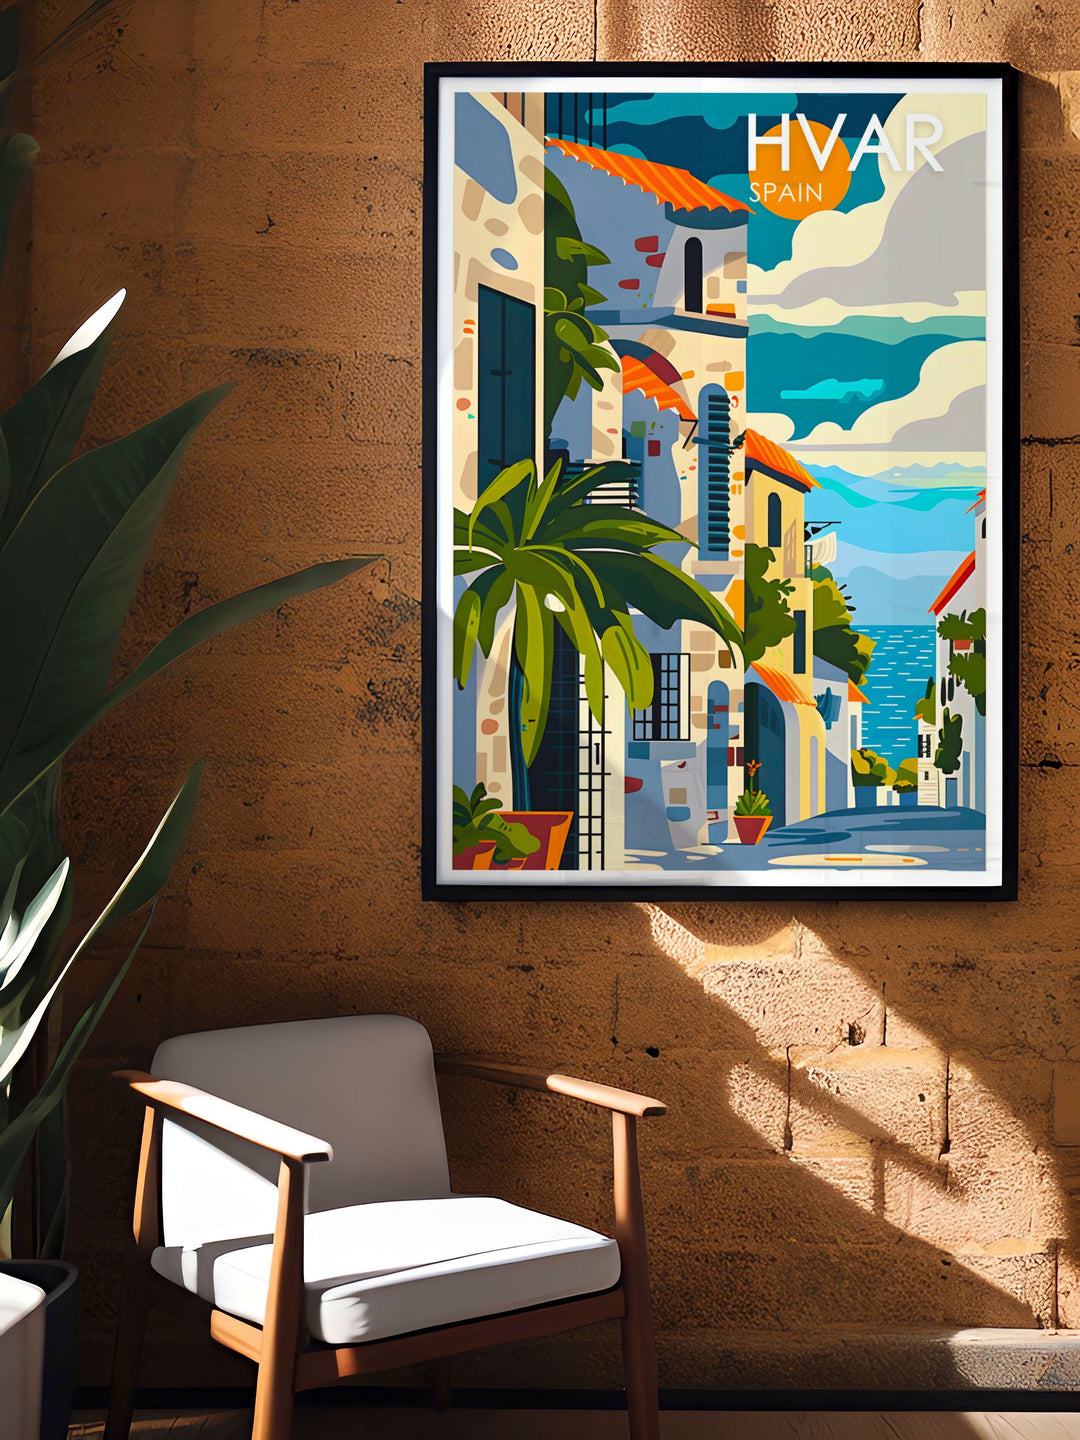 Gallery wall art of St. Stephens Square in Hvar, surrounded by historical landmarks and bustling with life. This print captures the essence of Hvars vibrant culture and rich history, making it a stunning addition to any collection.